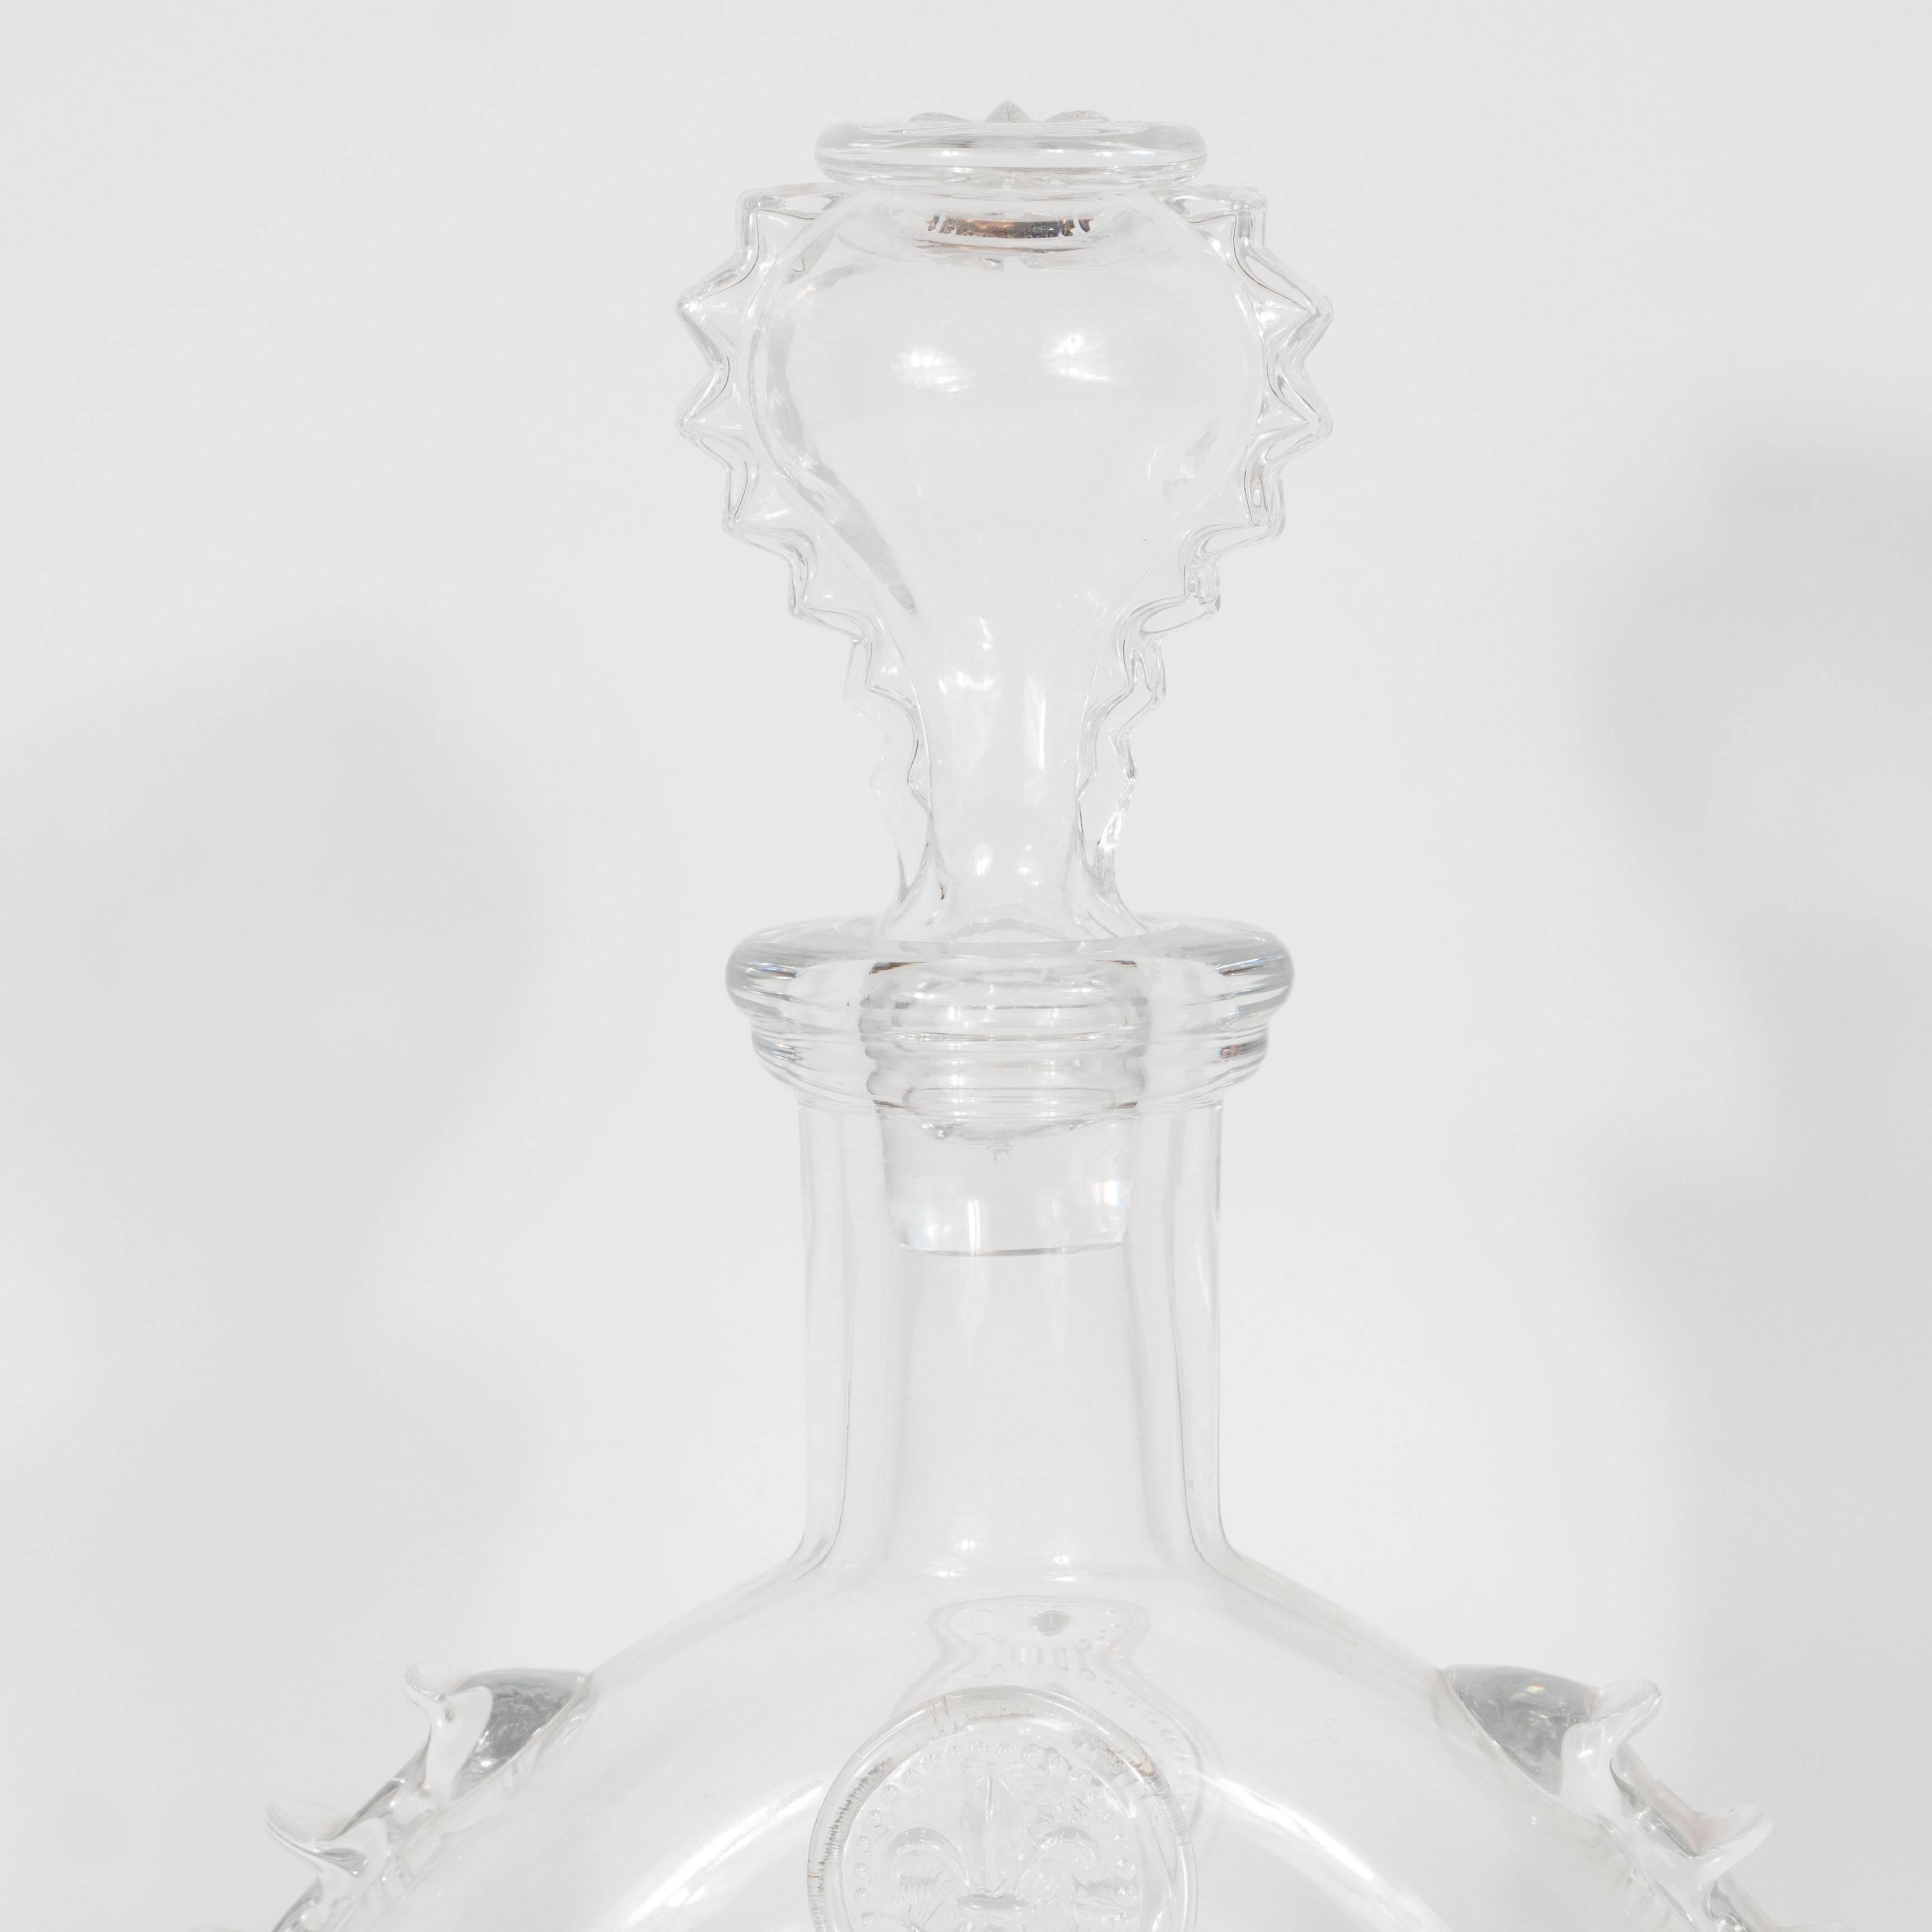 A vintage Baccarat crystal Louis XIII decanter. A bulbous, donut-form features spike detailing on either side and fleur-de-lys embossings throughout, as well as on top of the lid/cap. This piece is signed 